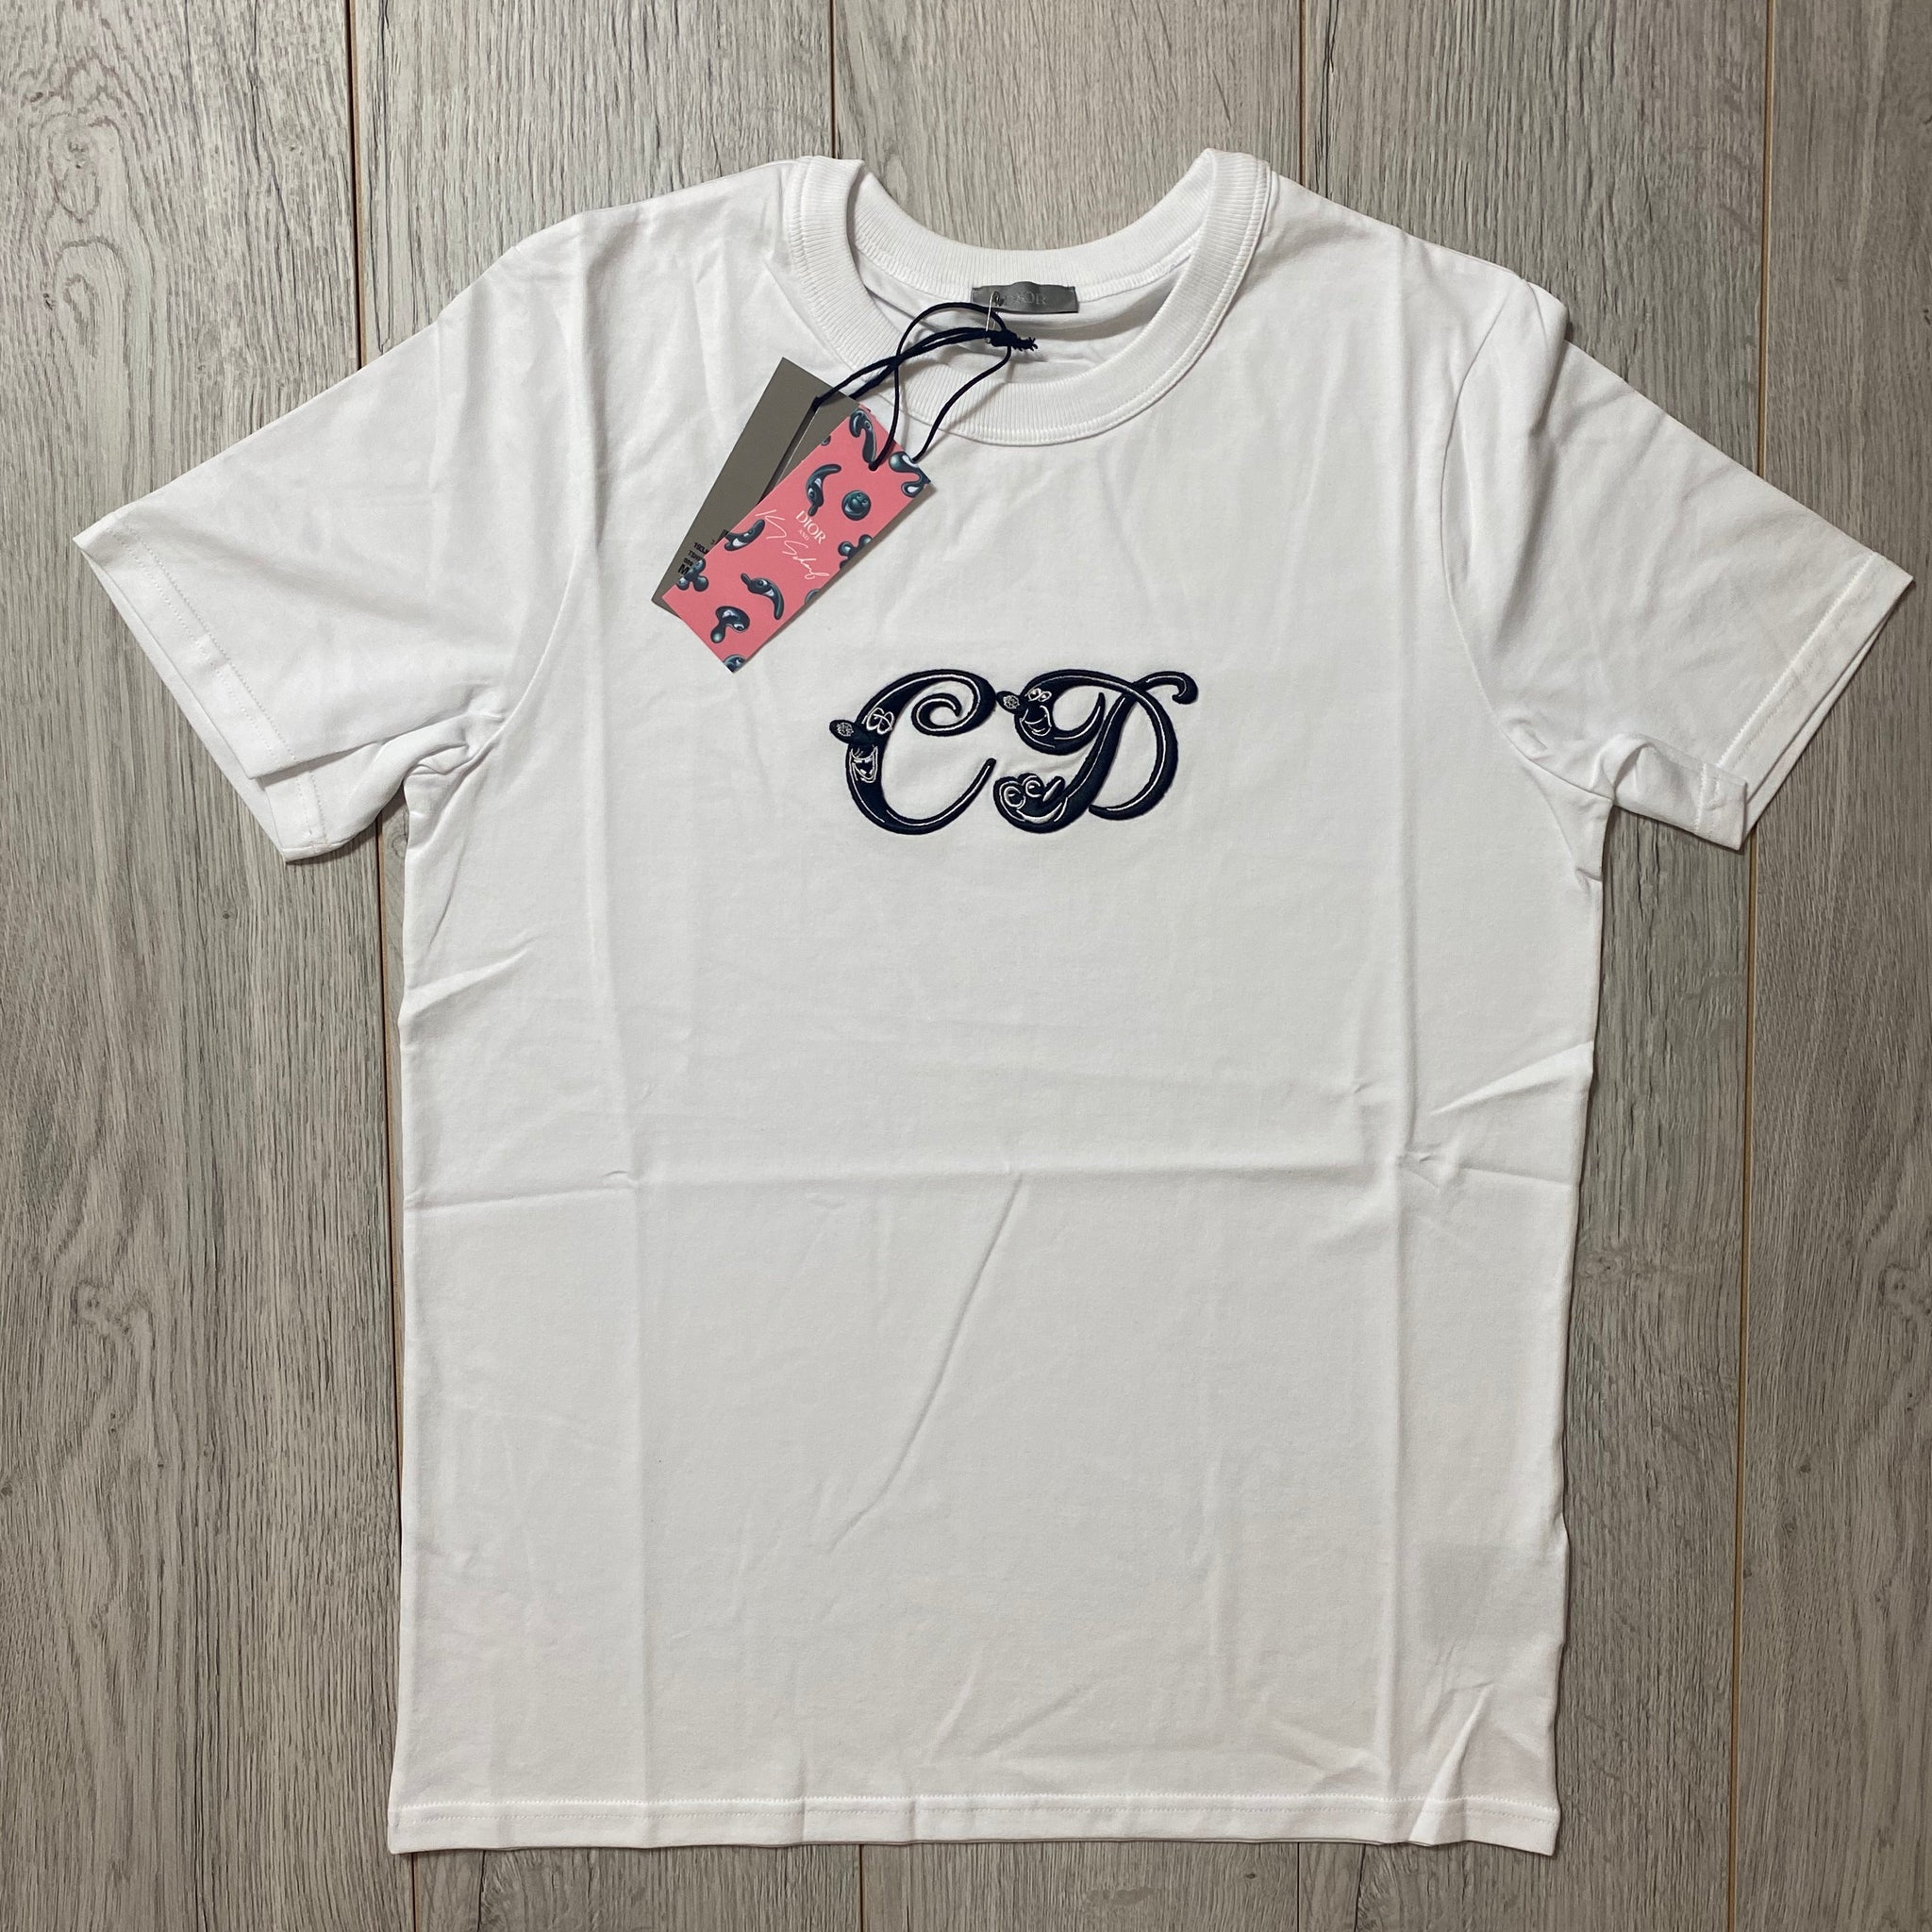 Dior x Kenny Scharf T shirt white – ROLLERSONS